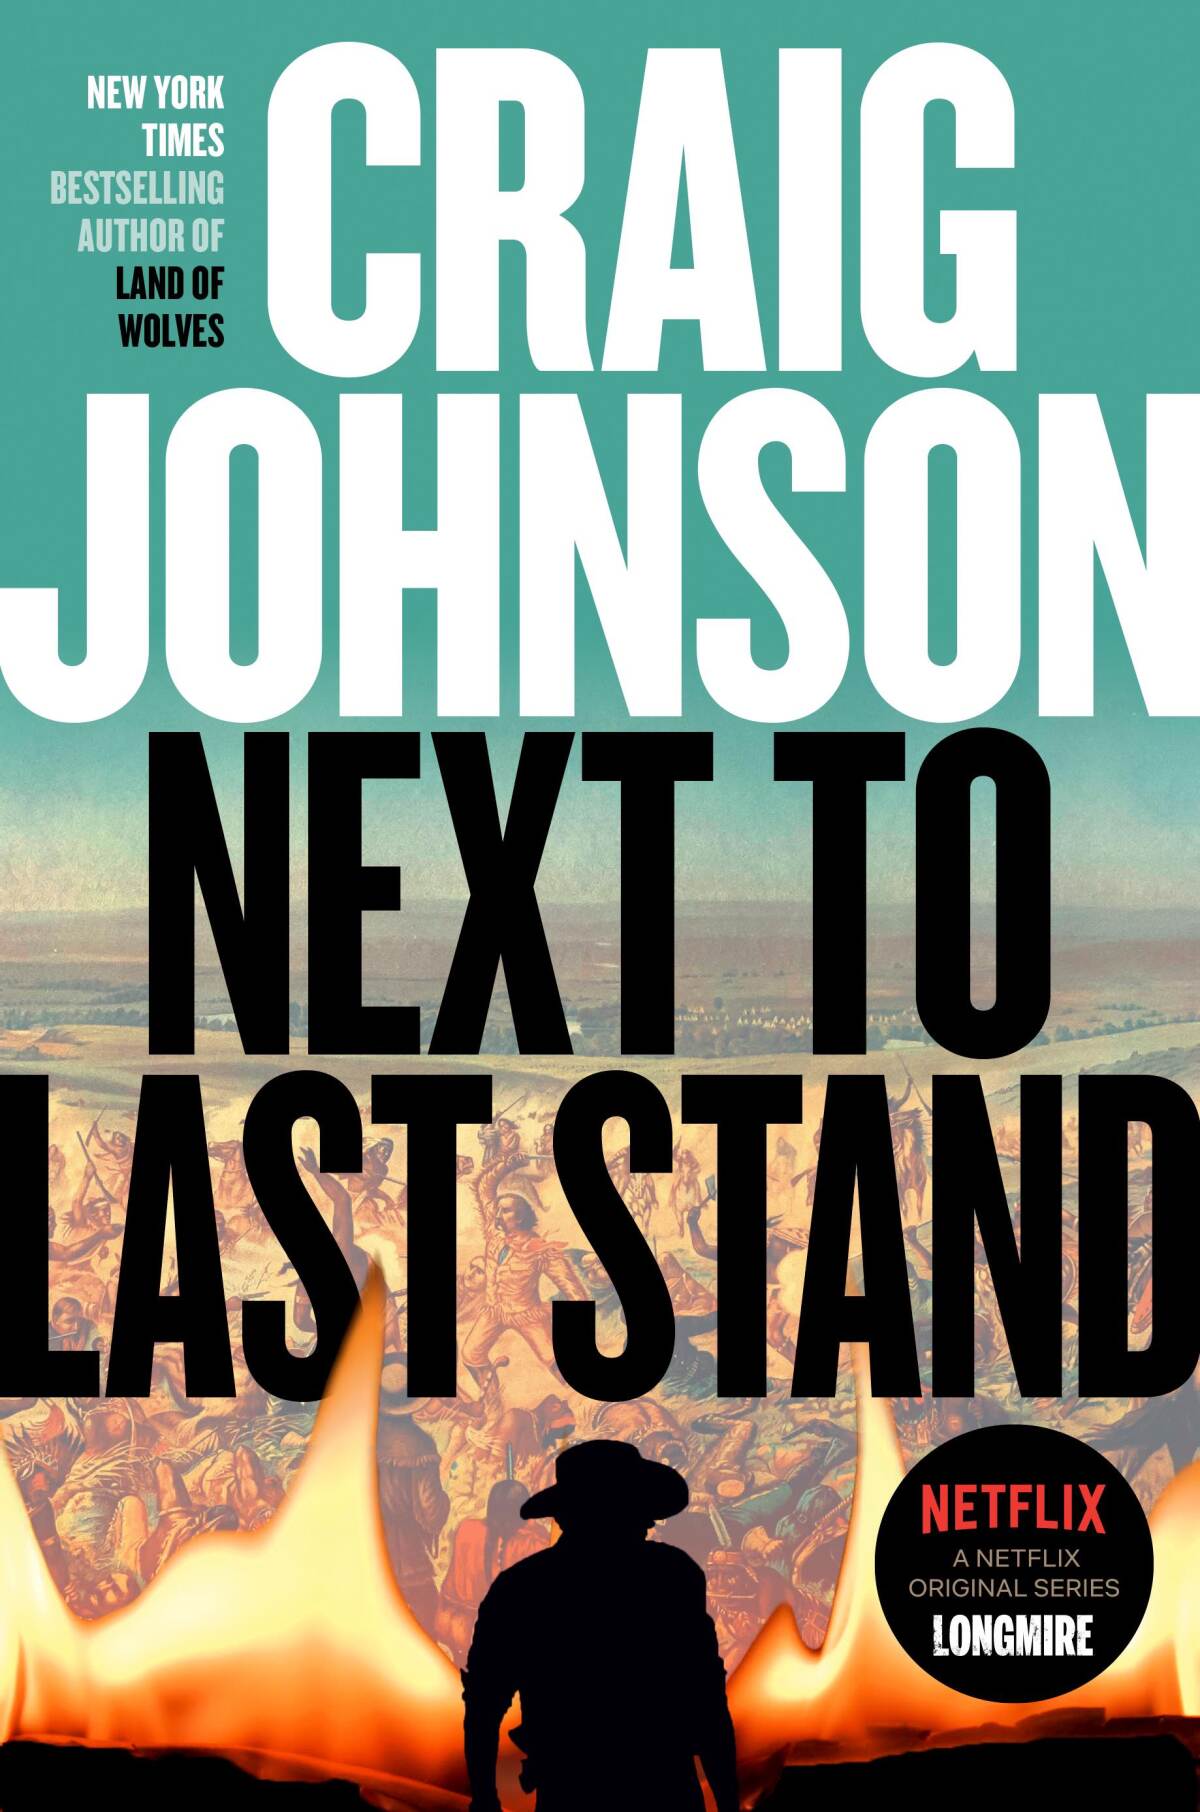 Book jacket for “Next to Last Stand” by Craig Johnson.